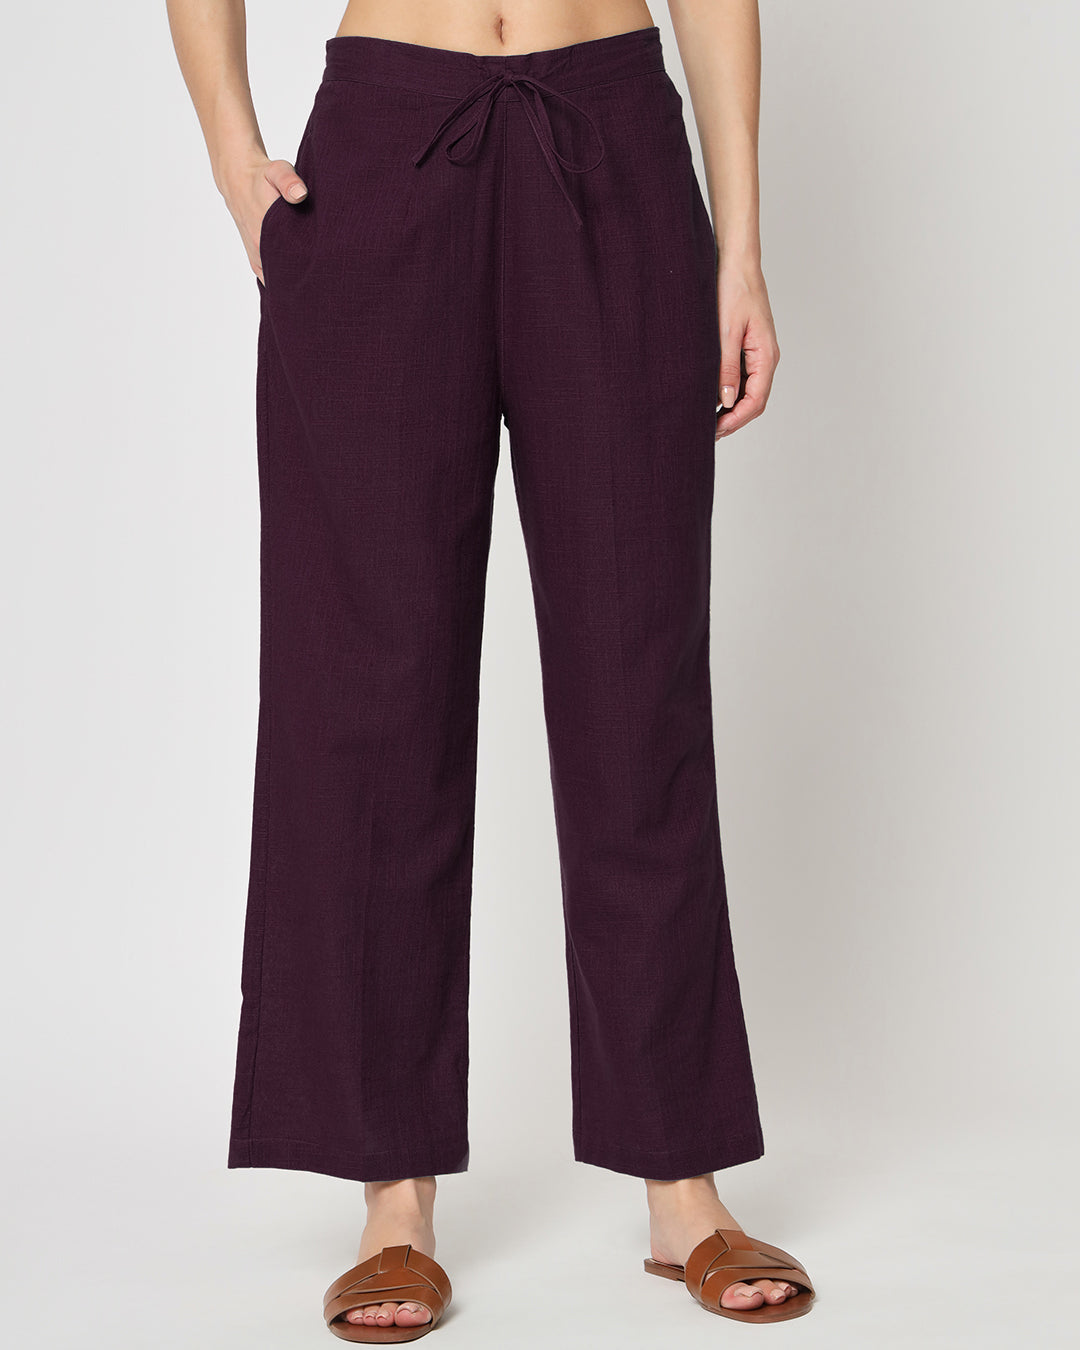 Combo: Iced Grey & Plum Passion Straight Pants- Set of 2